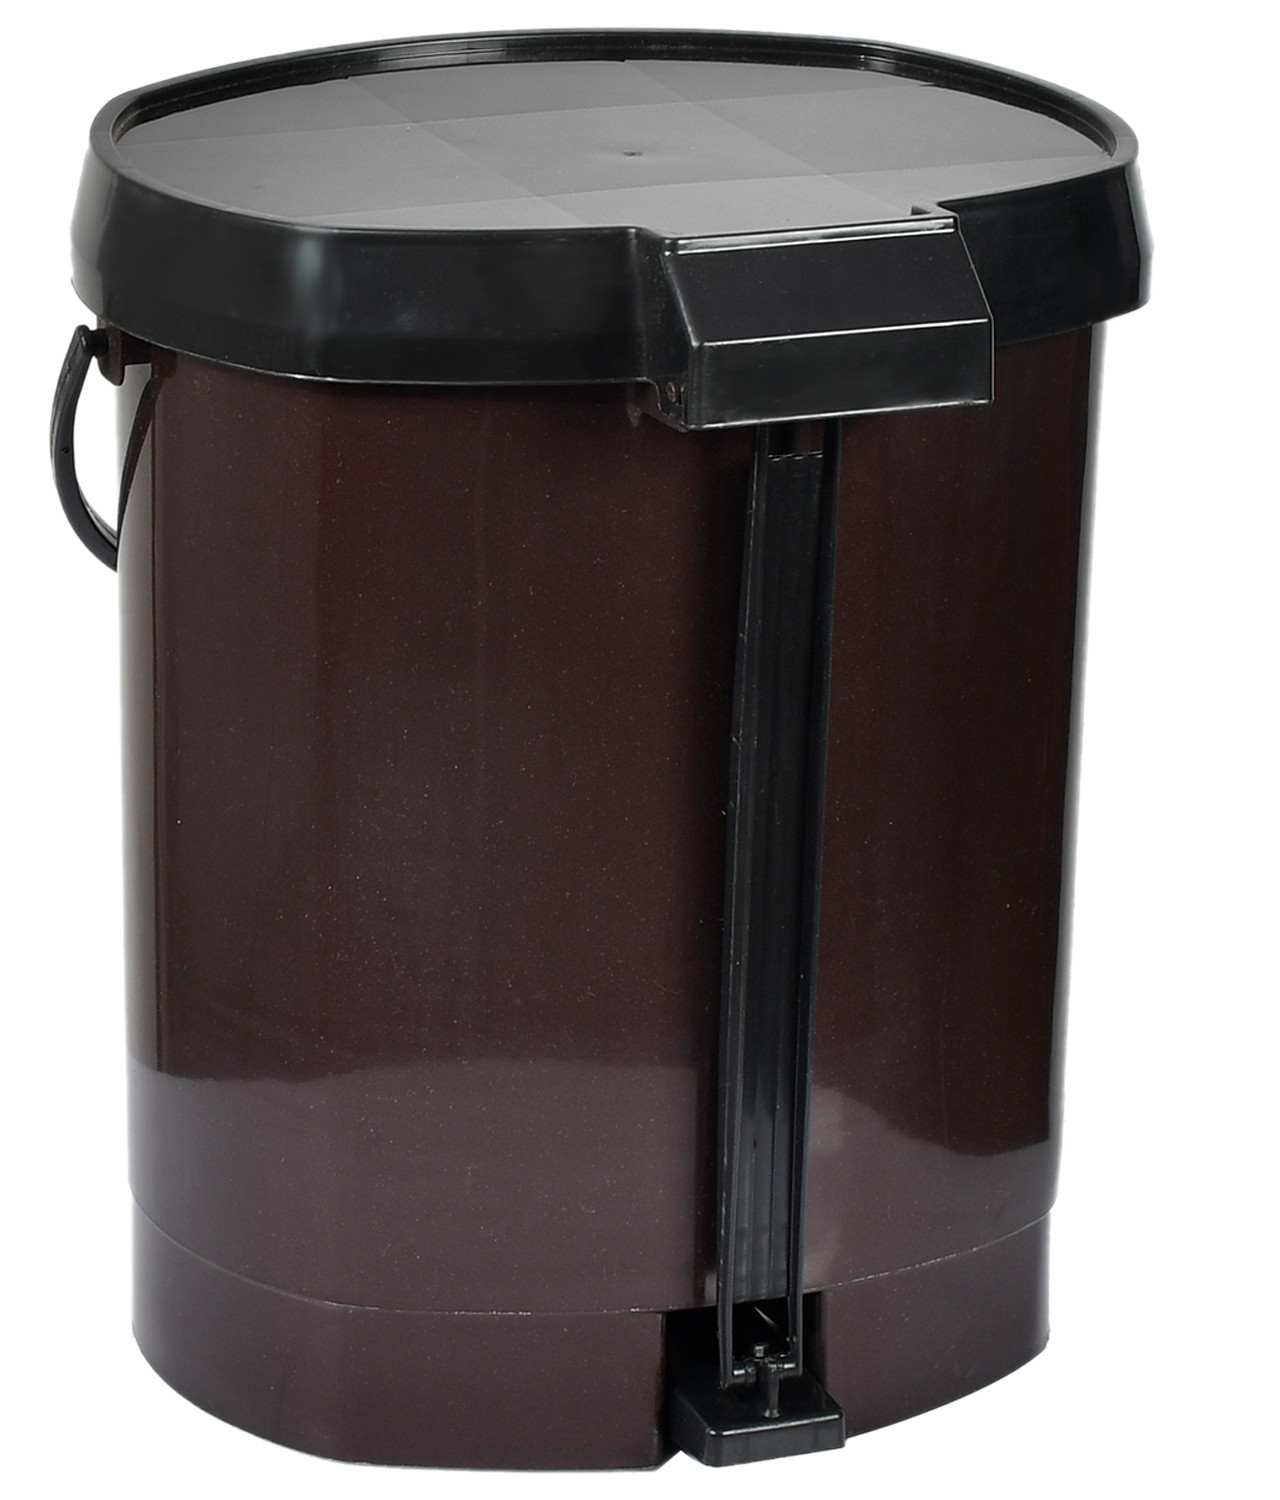 Kuber Industries Multiuses Plastic Pedal Dustbin, Waste Bin, Trash Can With Detachable Bucket, 10 Litre (Brown)-47KM0729